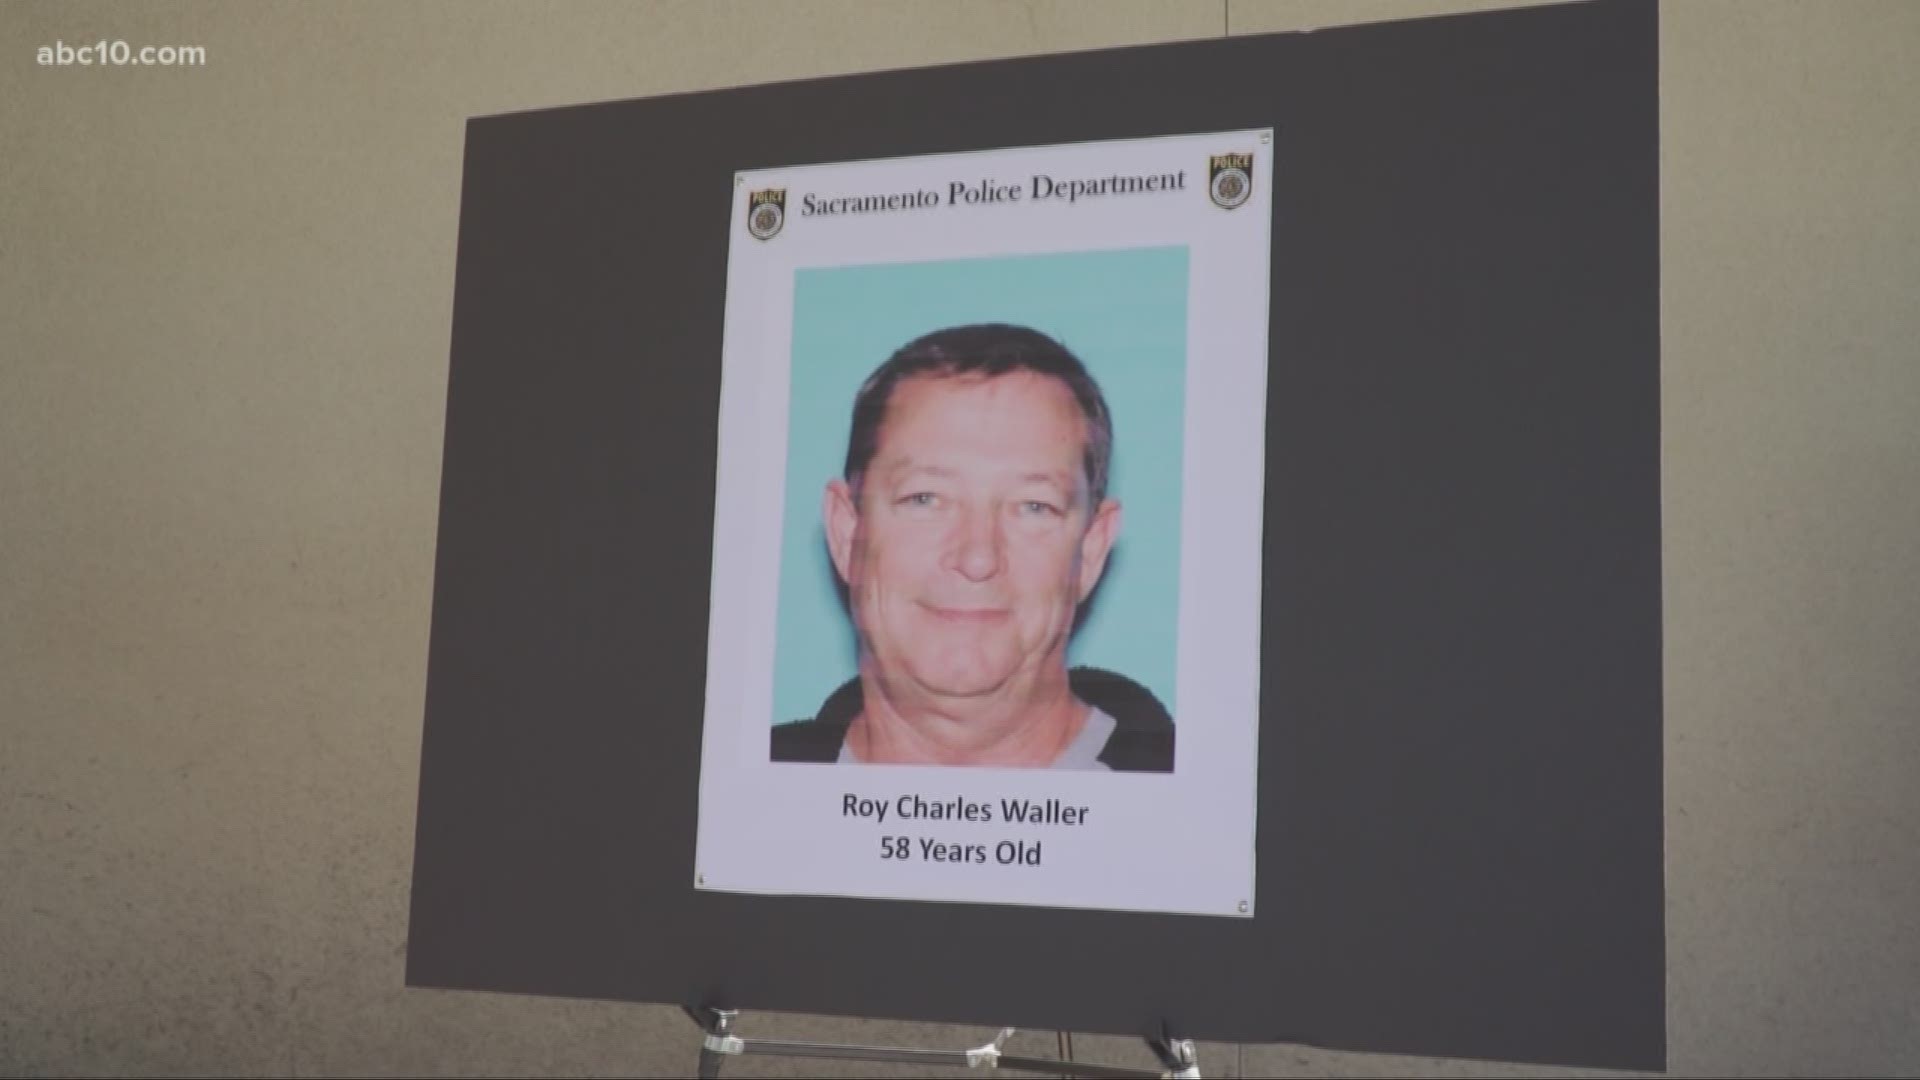 Law enforcement officials arrested 58-year-old Roy Charles Waller in Berkley on Thursday. Police are accusing him of being the "NorCal Rapist," whose been linked to attacking at least 10 women from 1991 through 2006.